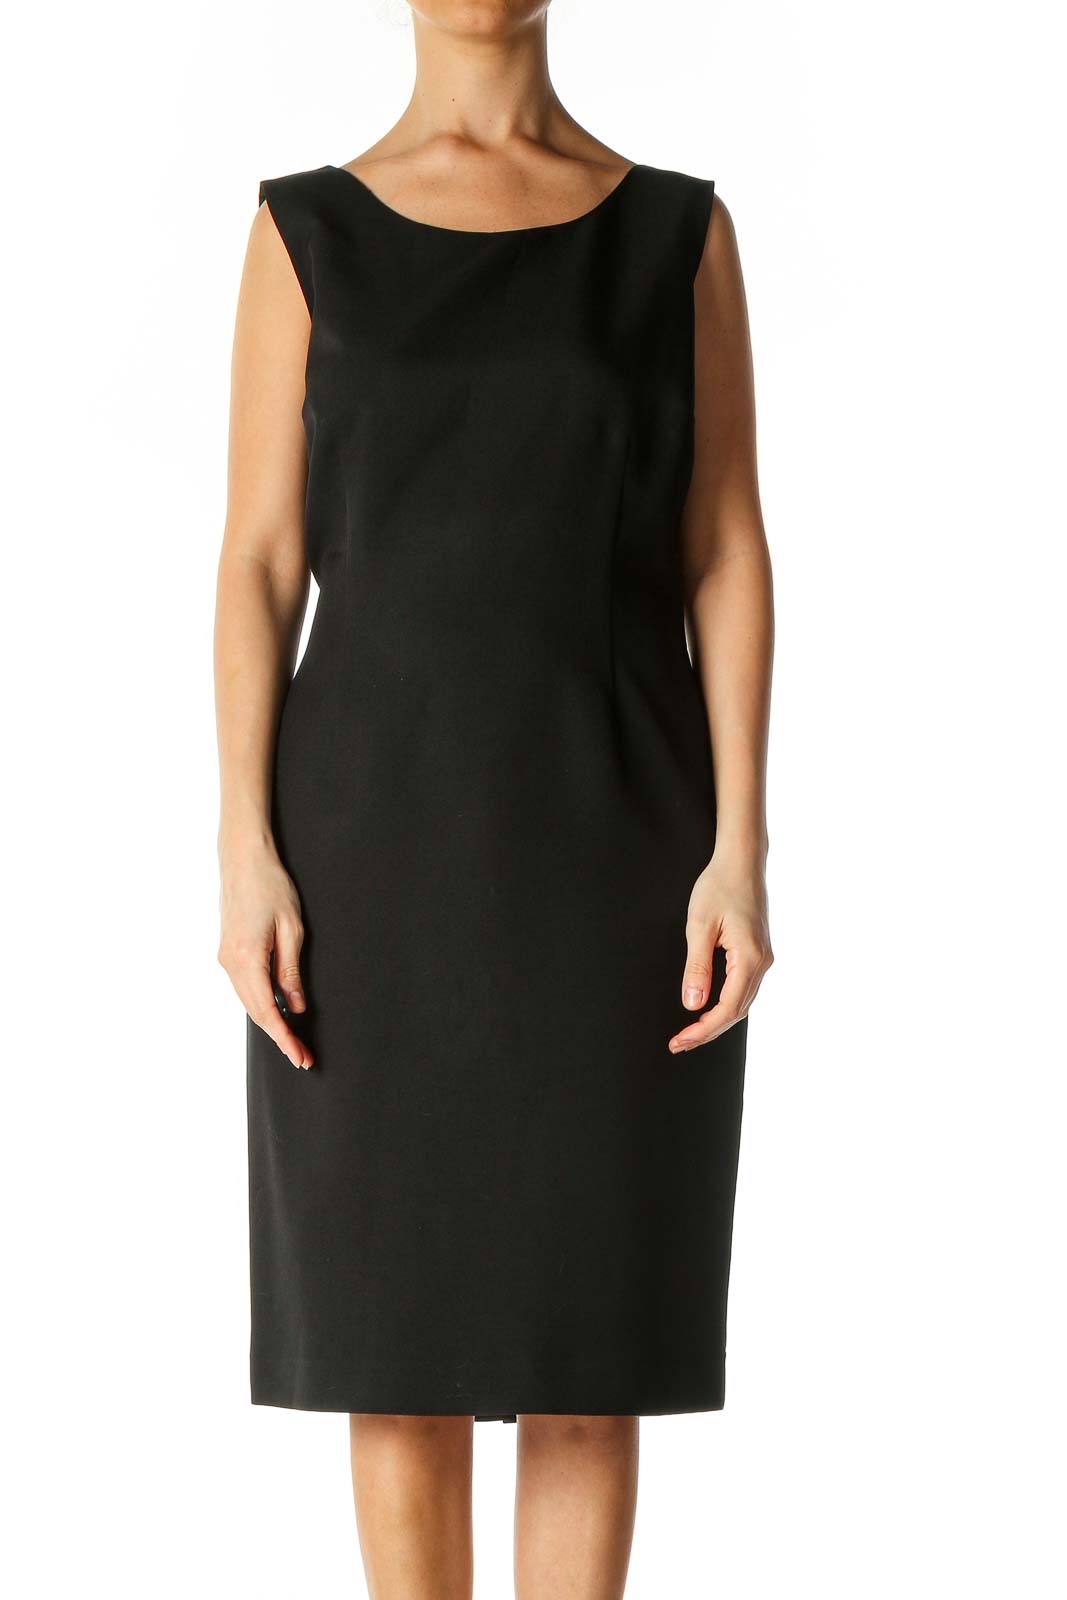 Black Solid Casual Shift Dress Front